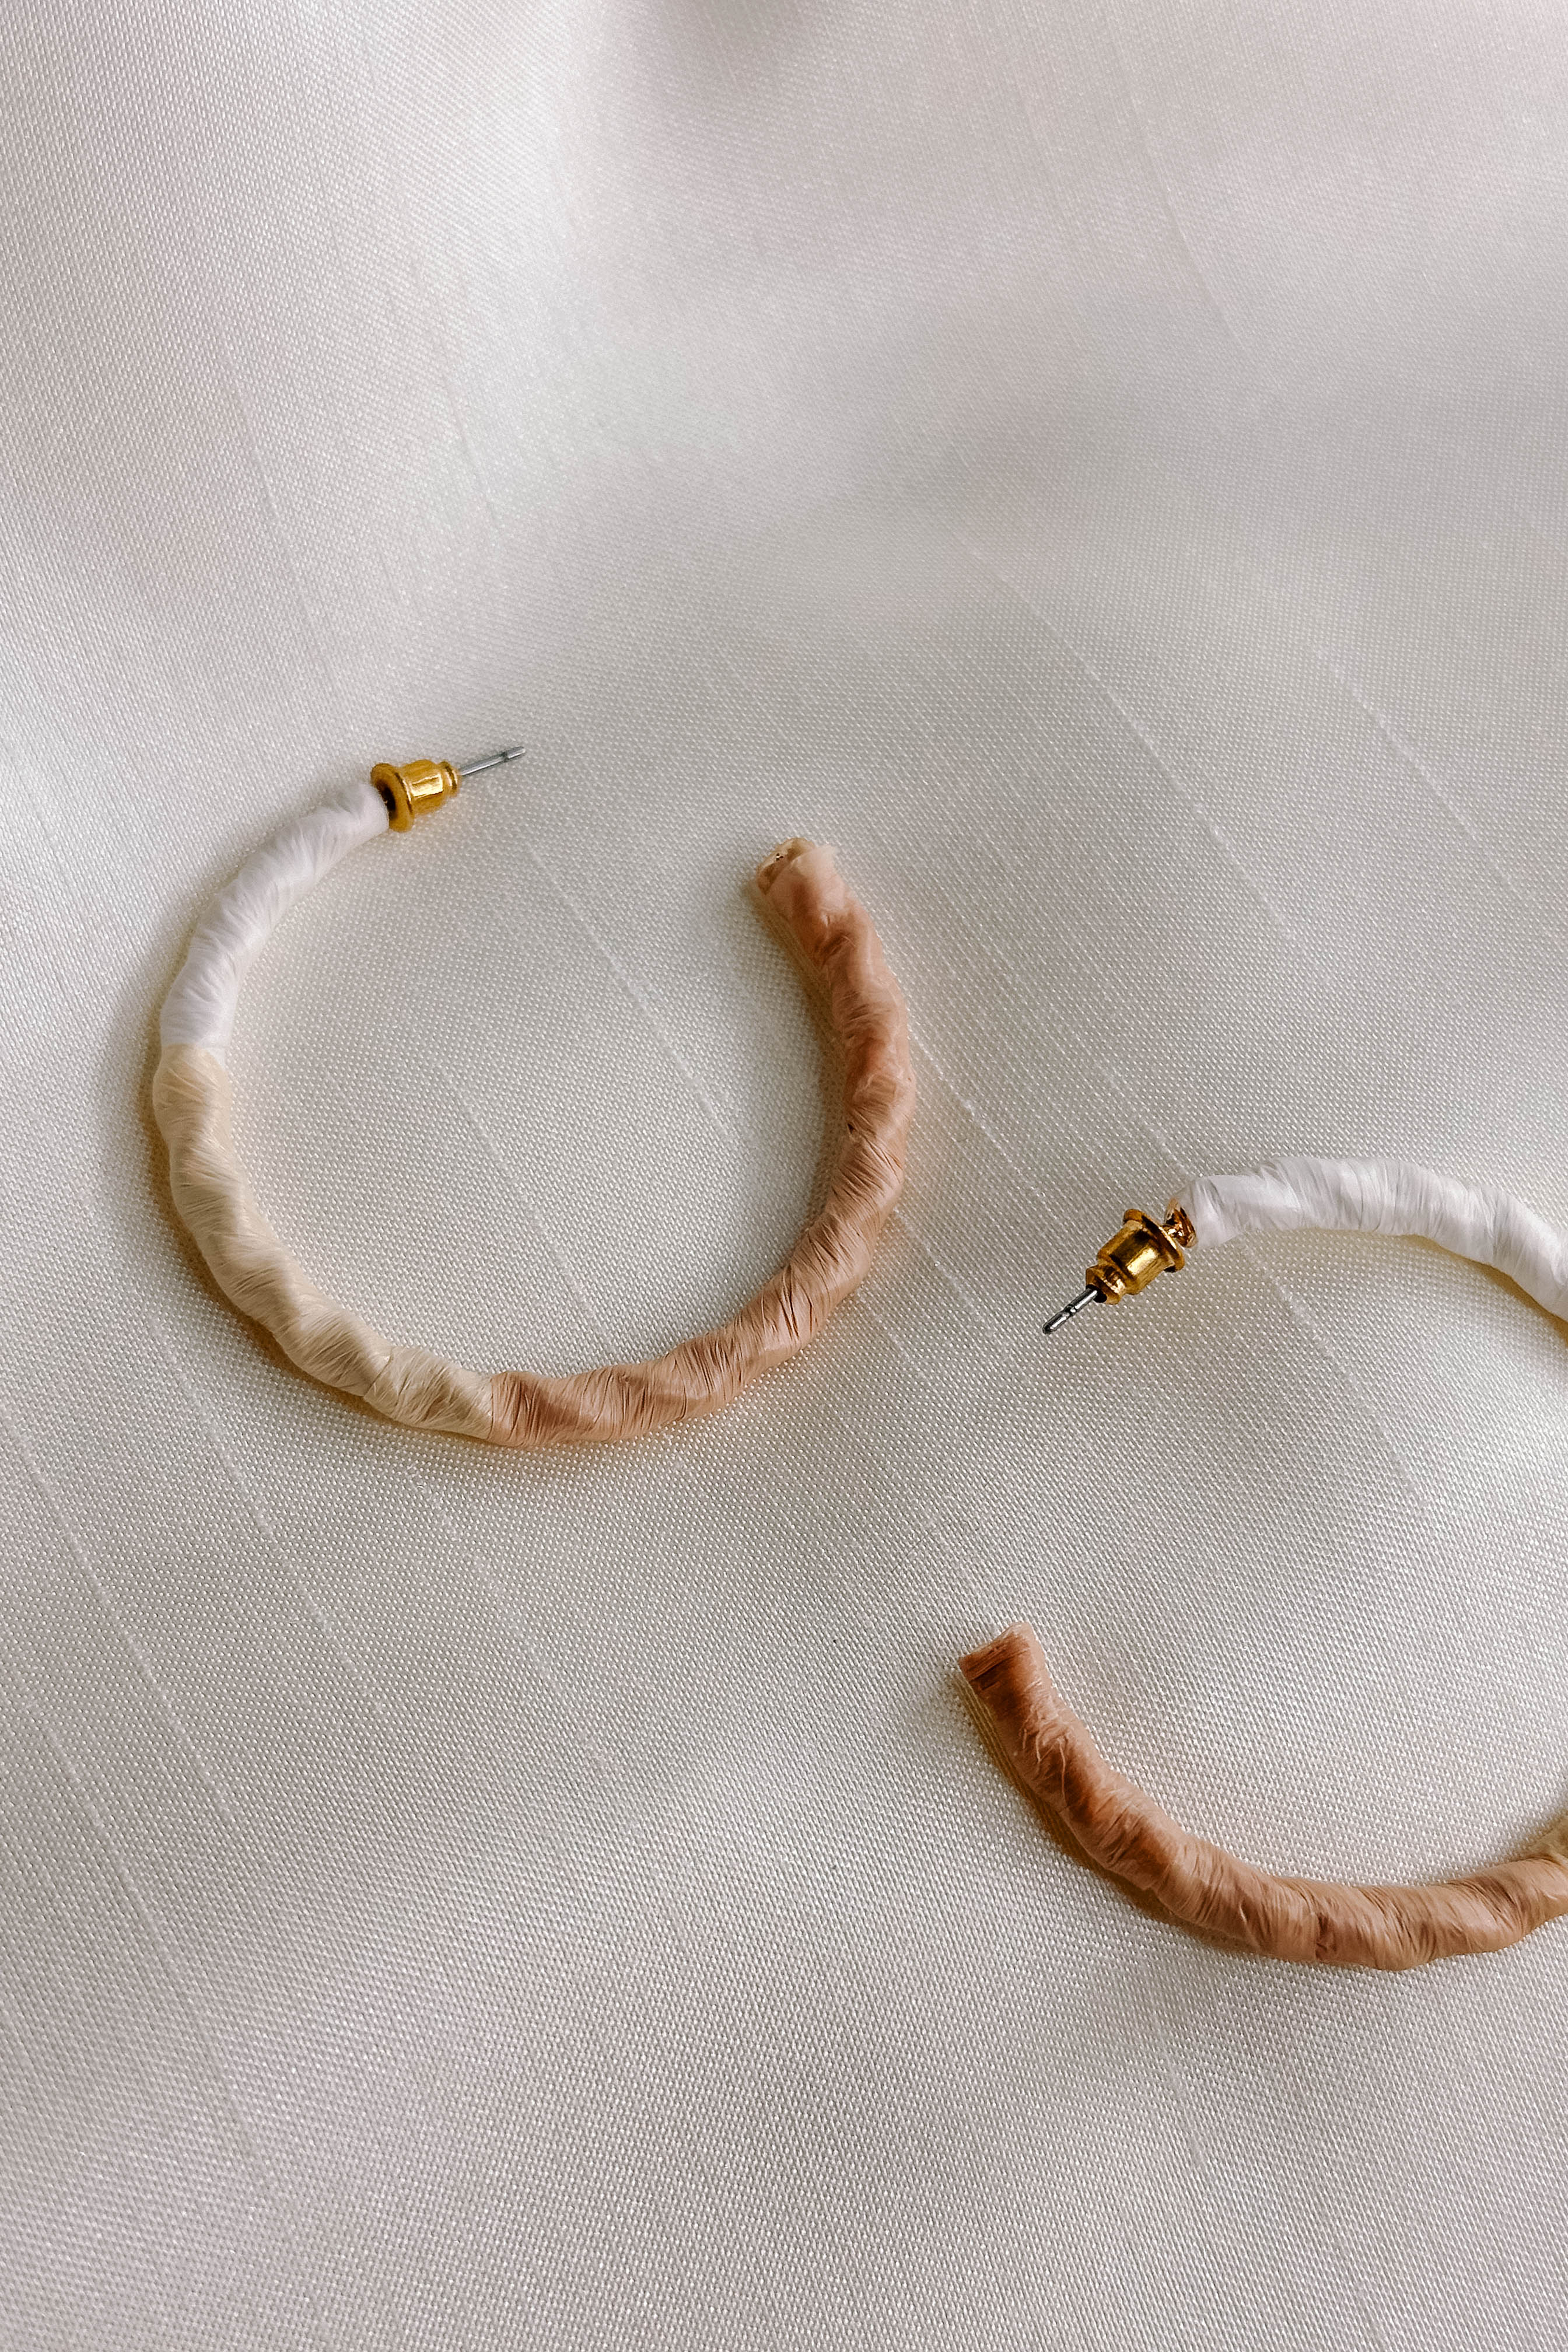 Side view of the Summer Breeze Earrings which features open, large hoops wrapped in white, beige and cream paper, shown on cream fabric.